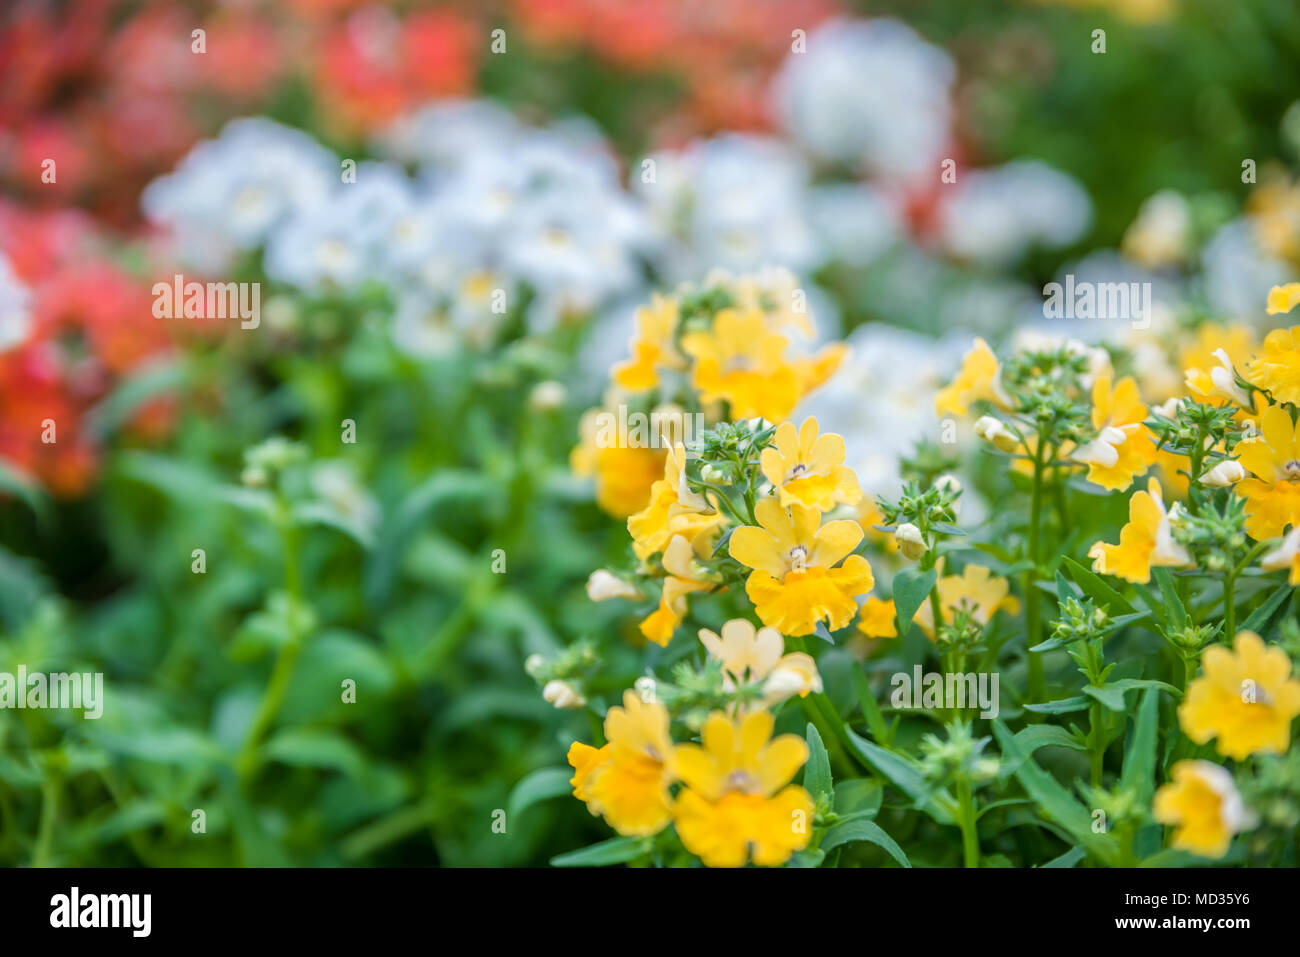 Top view of colorful different potted plants and seedlings blooming in natural garden for sale Stock Photo